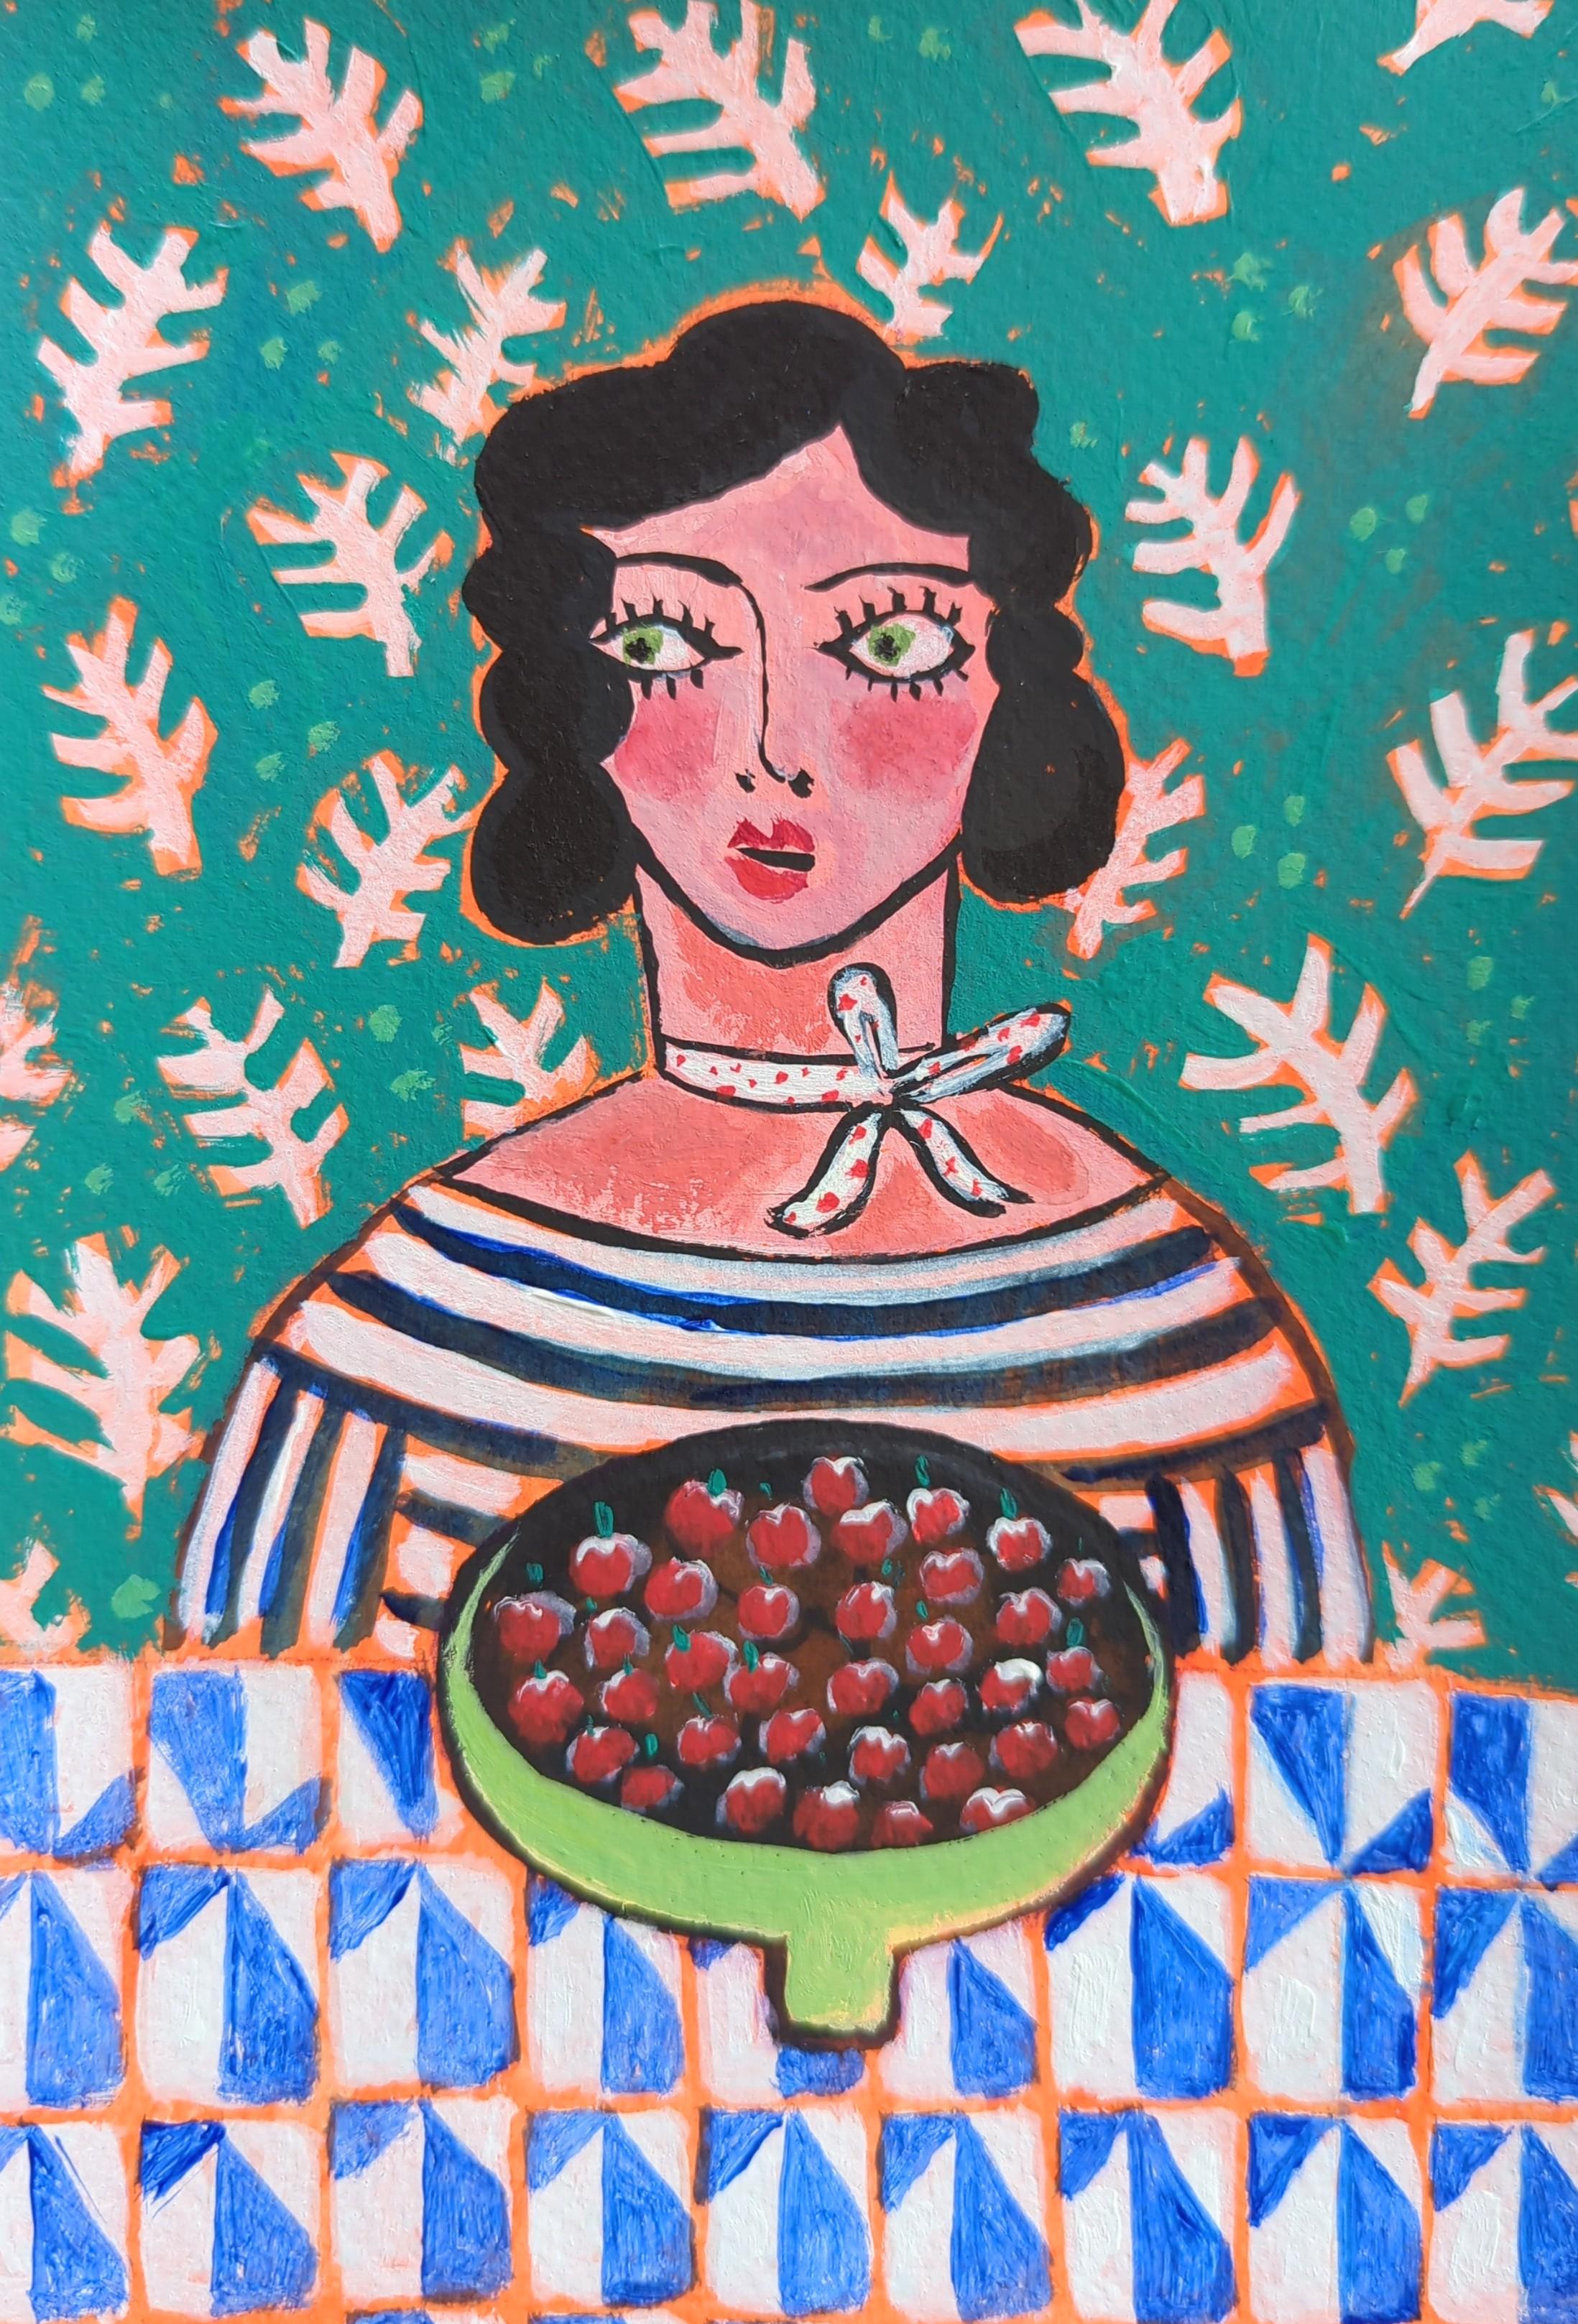 Colourful and witty portrait with lively patterns and still life elements. Painted in acrylic on paper and framed in a gorgeous chunky black wooden frame. A small painting with a big presence. framed size 24x31cm.

Additional information:
Acrylic